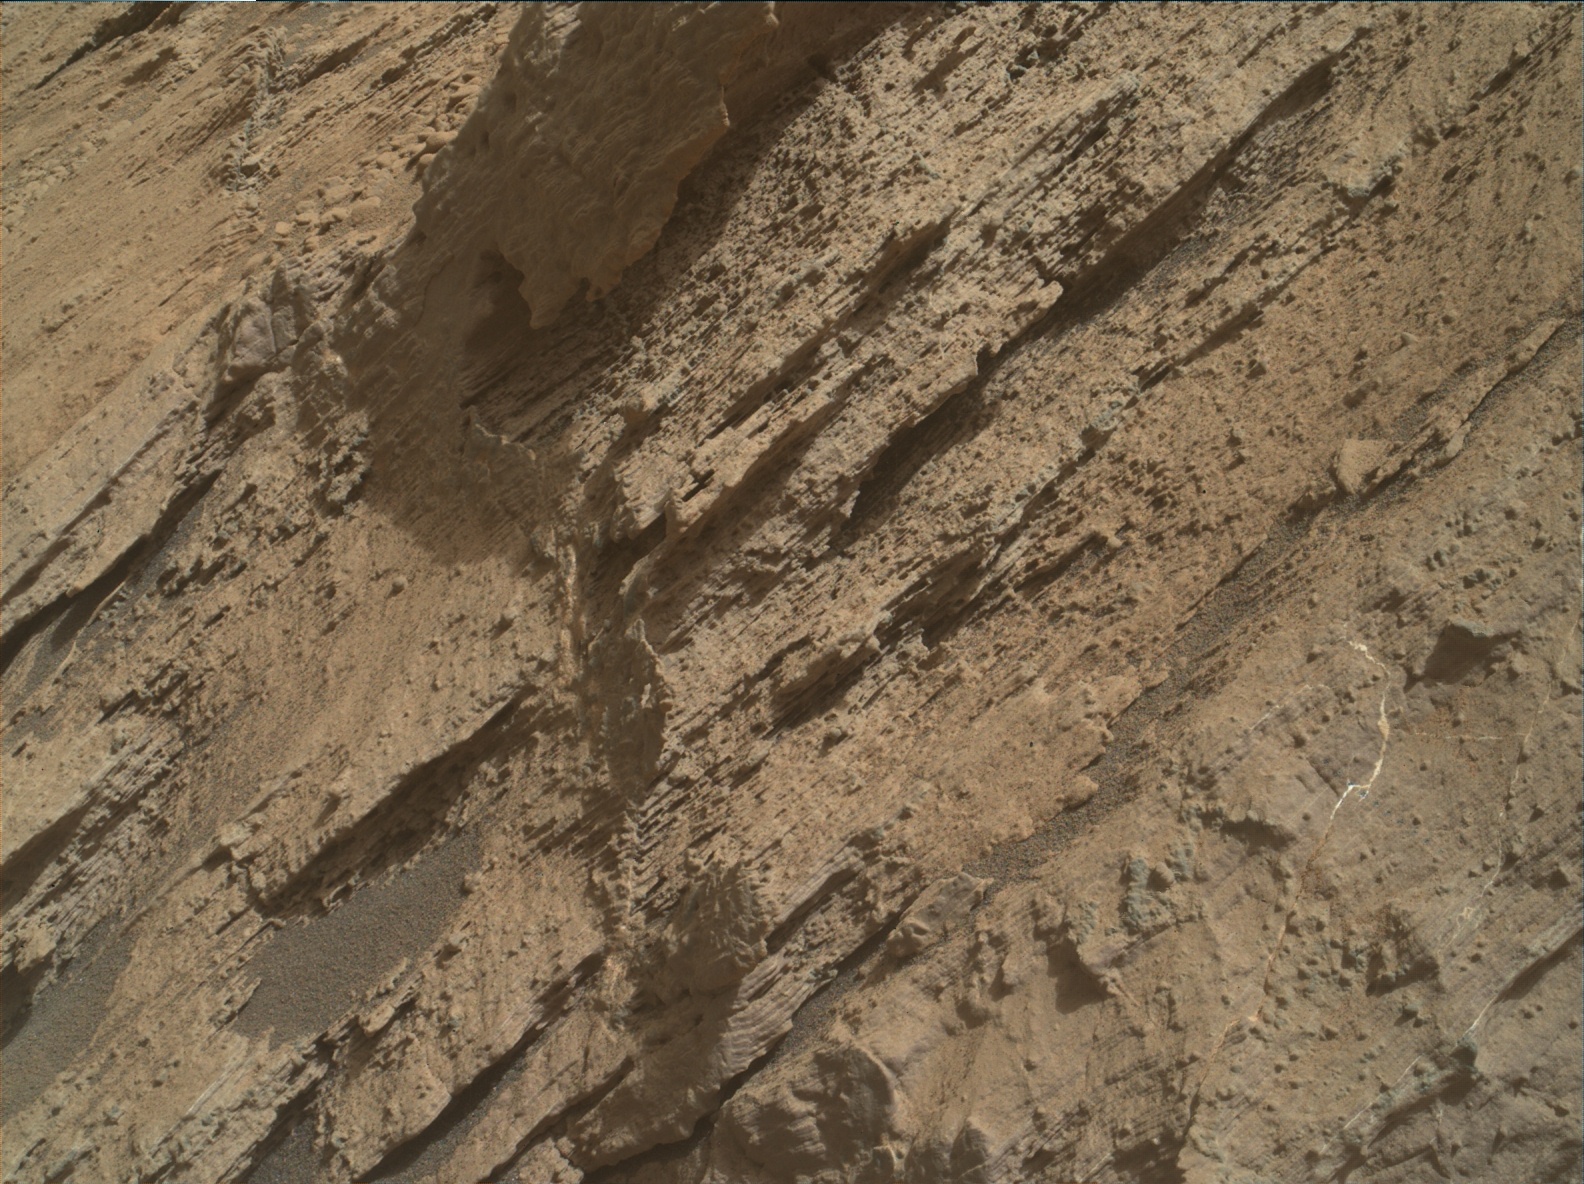 Nasa's Mars rover Curiosity acquired this image using its Mars Hand Lens Imager (MAHLI) on Sol 2586